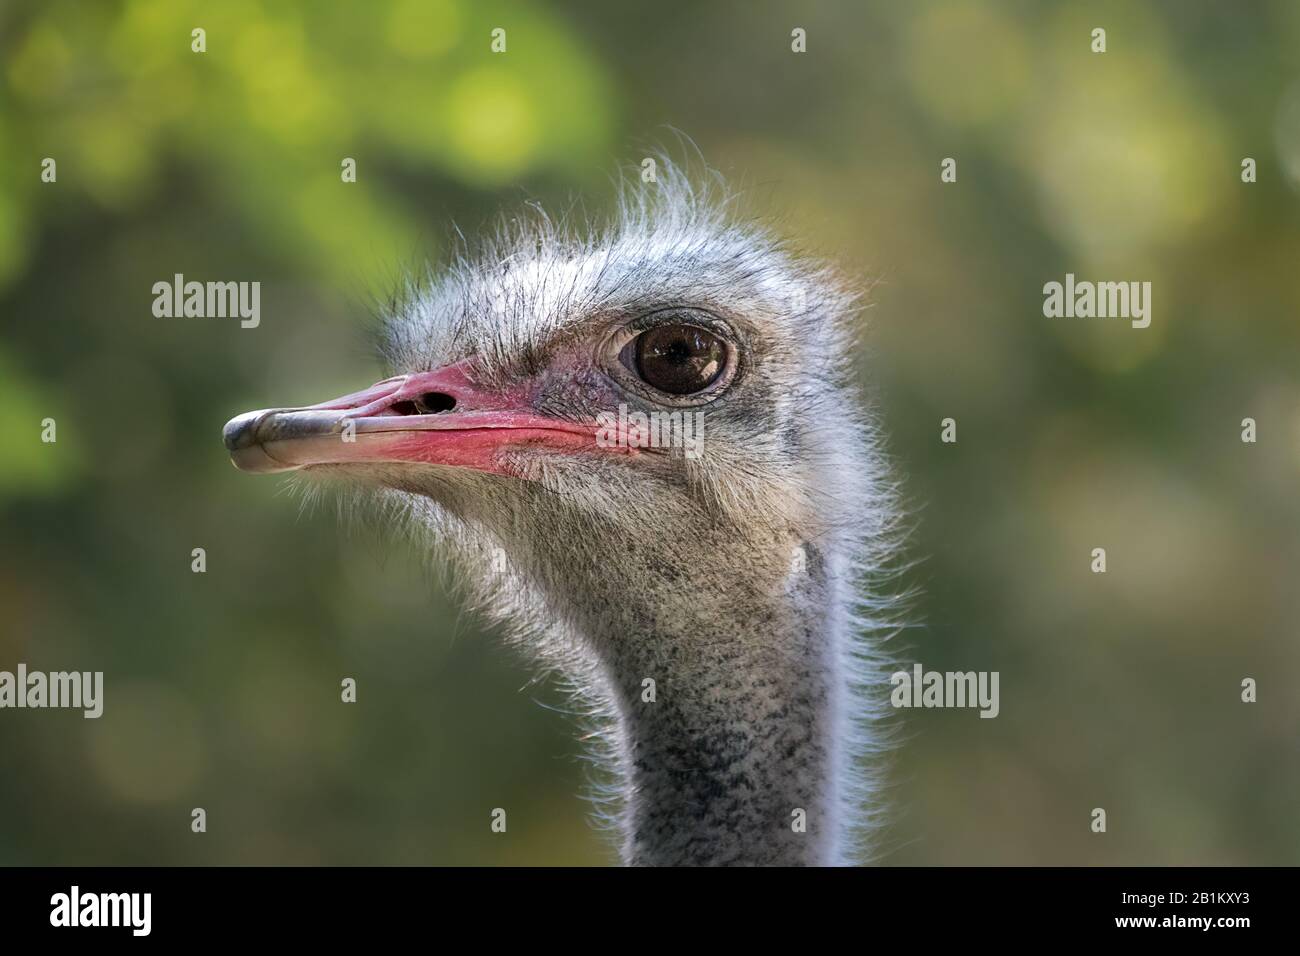 close up of the head of a greater rhea, isolated on blurry green background Stock Photo